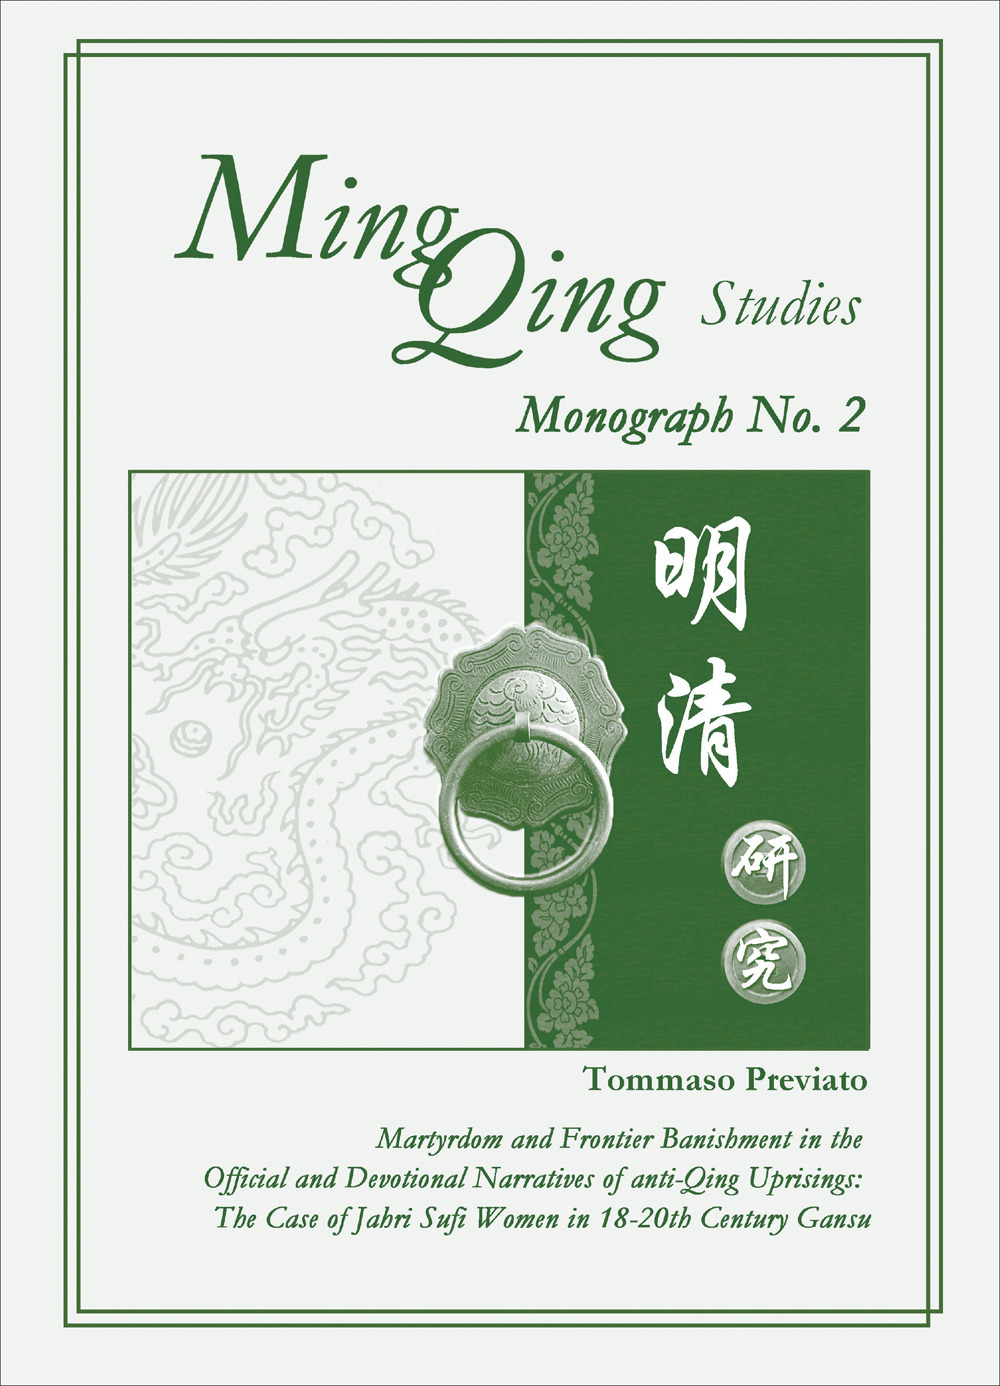 Ming Qing studies. Martyrdom and Frontier Banishment in the Official and Devotional Narratives of anti-Qing Uprisings. The Case of Jahri Sufi Women in 18-20th Century Gansu. Nuova ediz.. Vol. 2